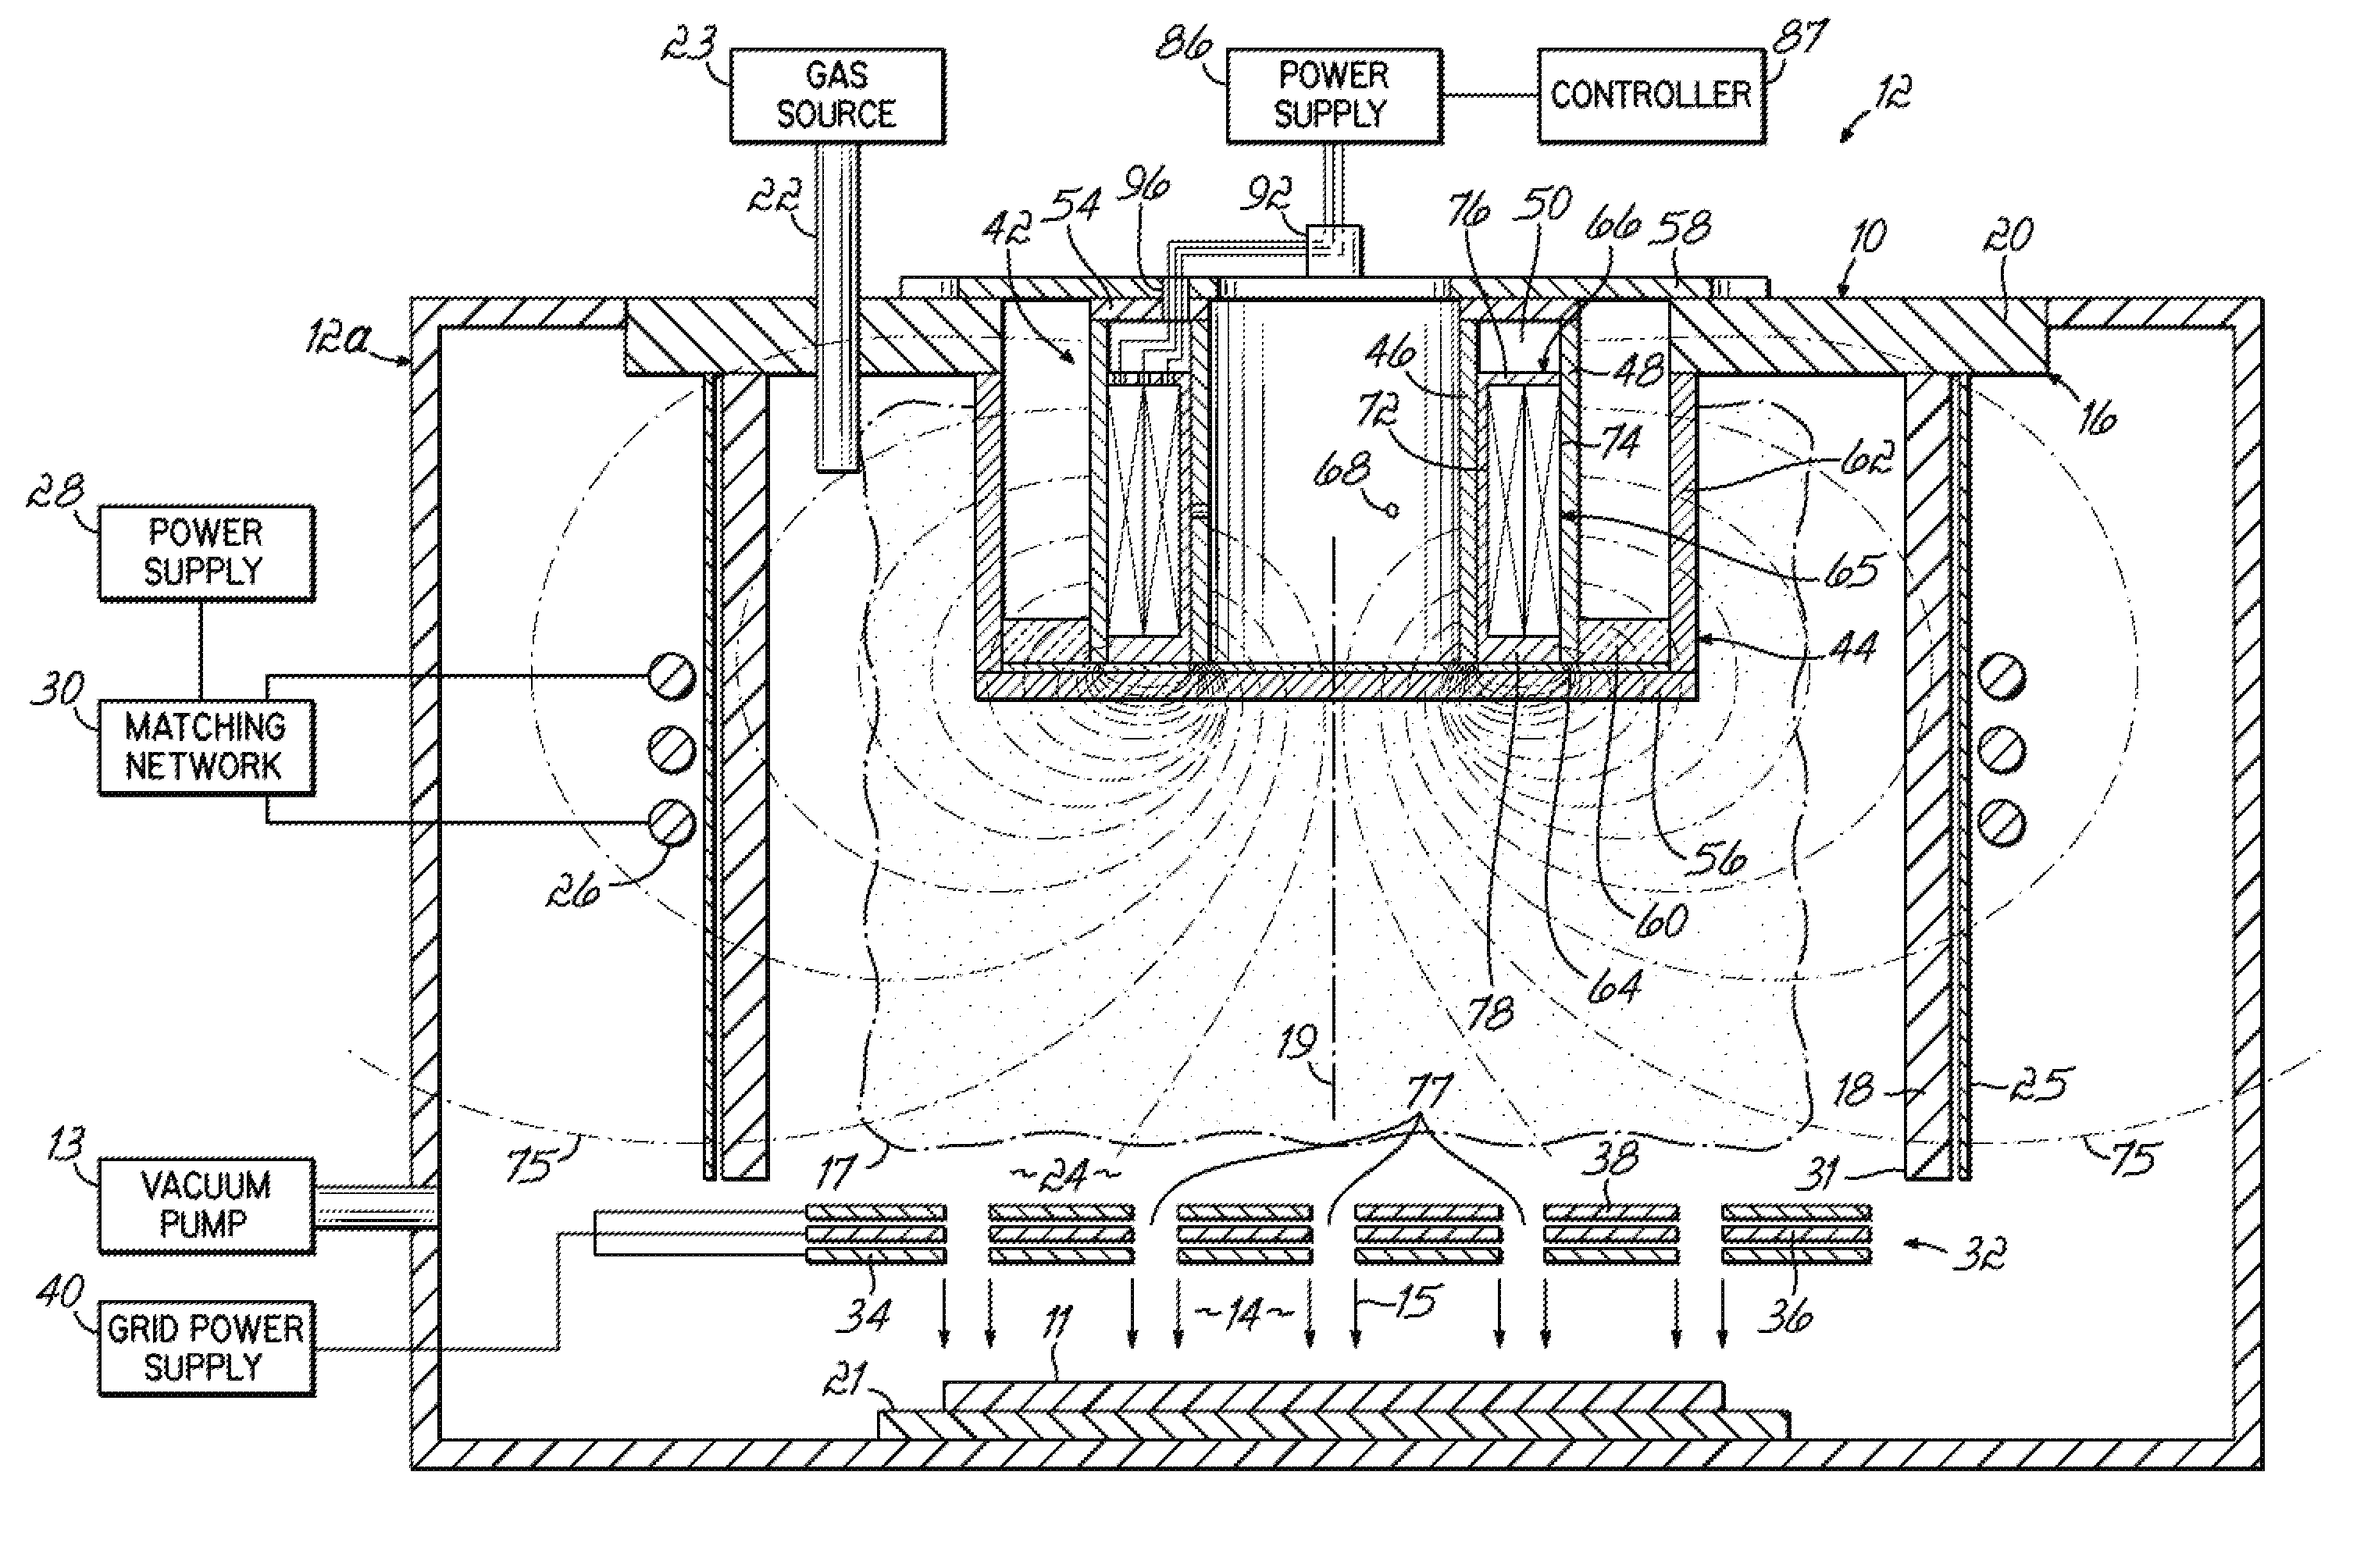 Ion sources and methods for generating an ion beam with a controllable ion current density distribution